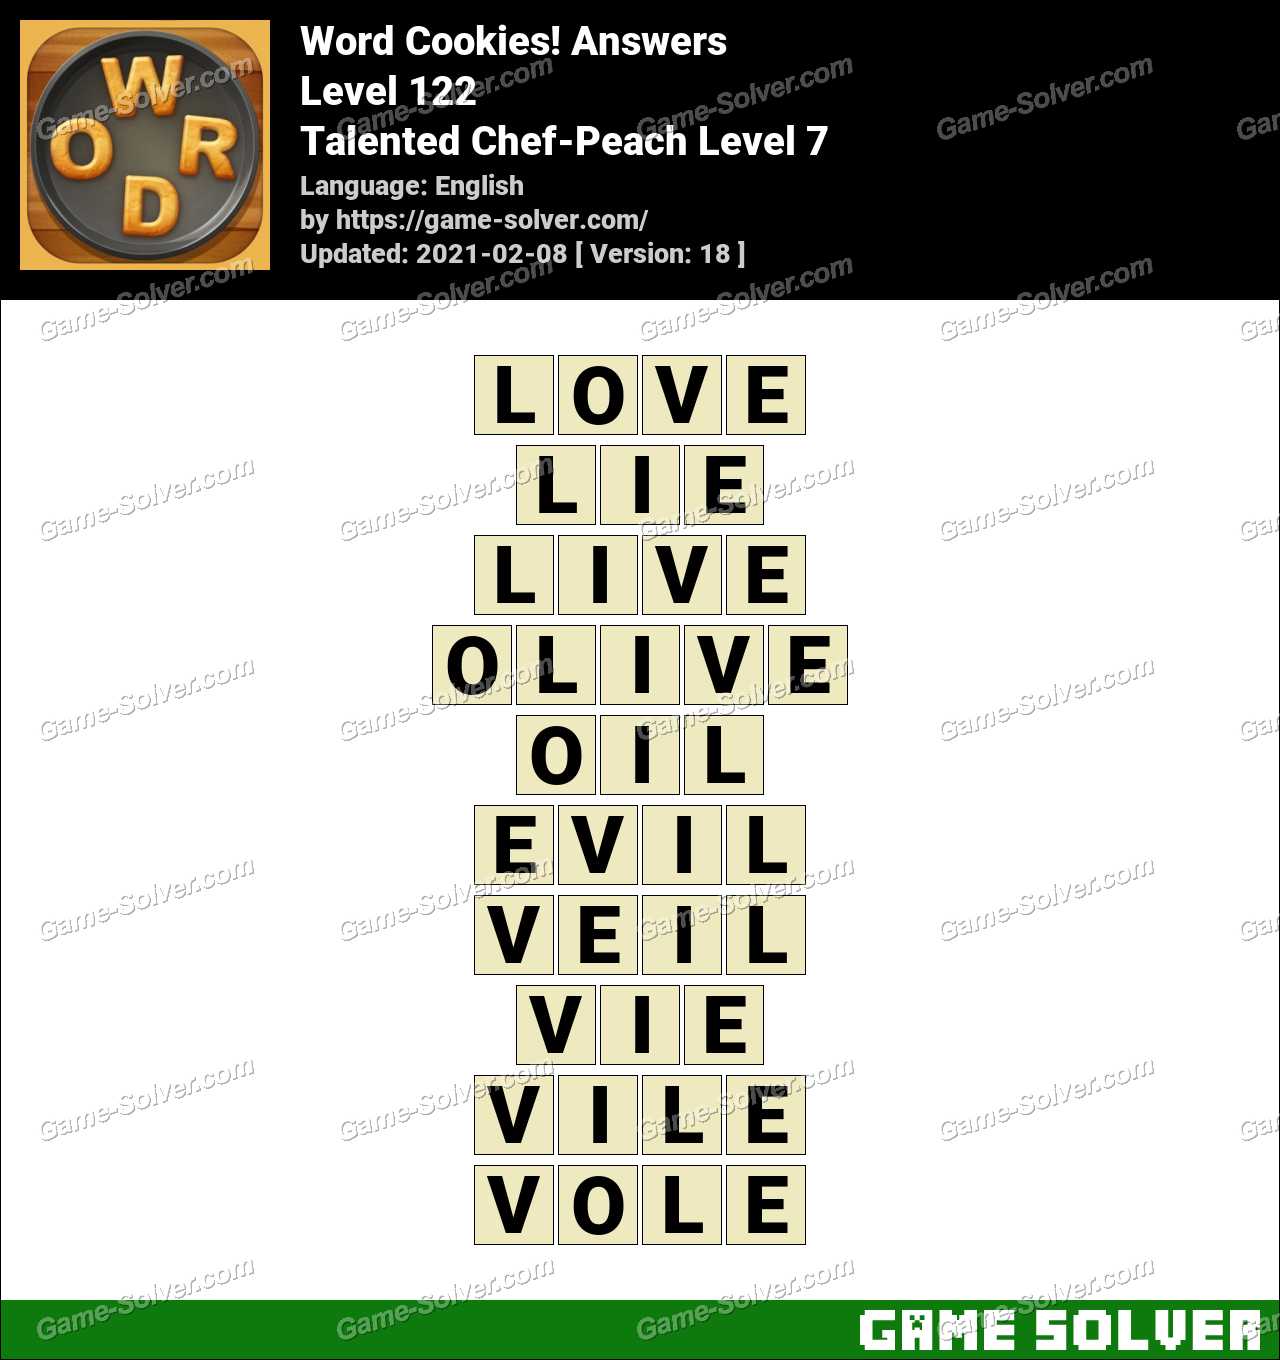 Word Cookies Talented Chef-Peach Level 7 Answers